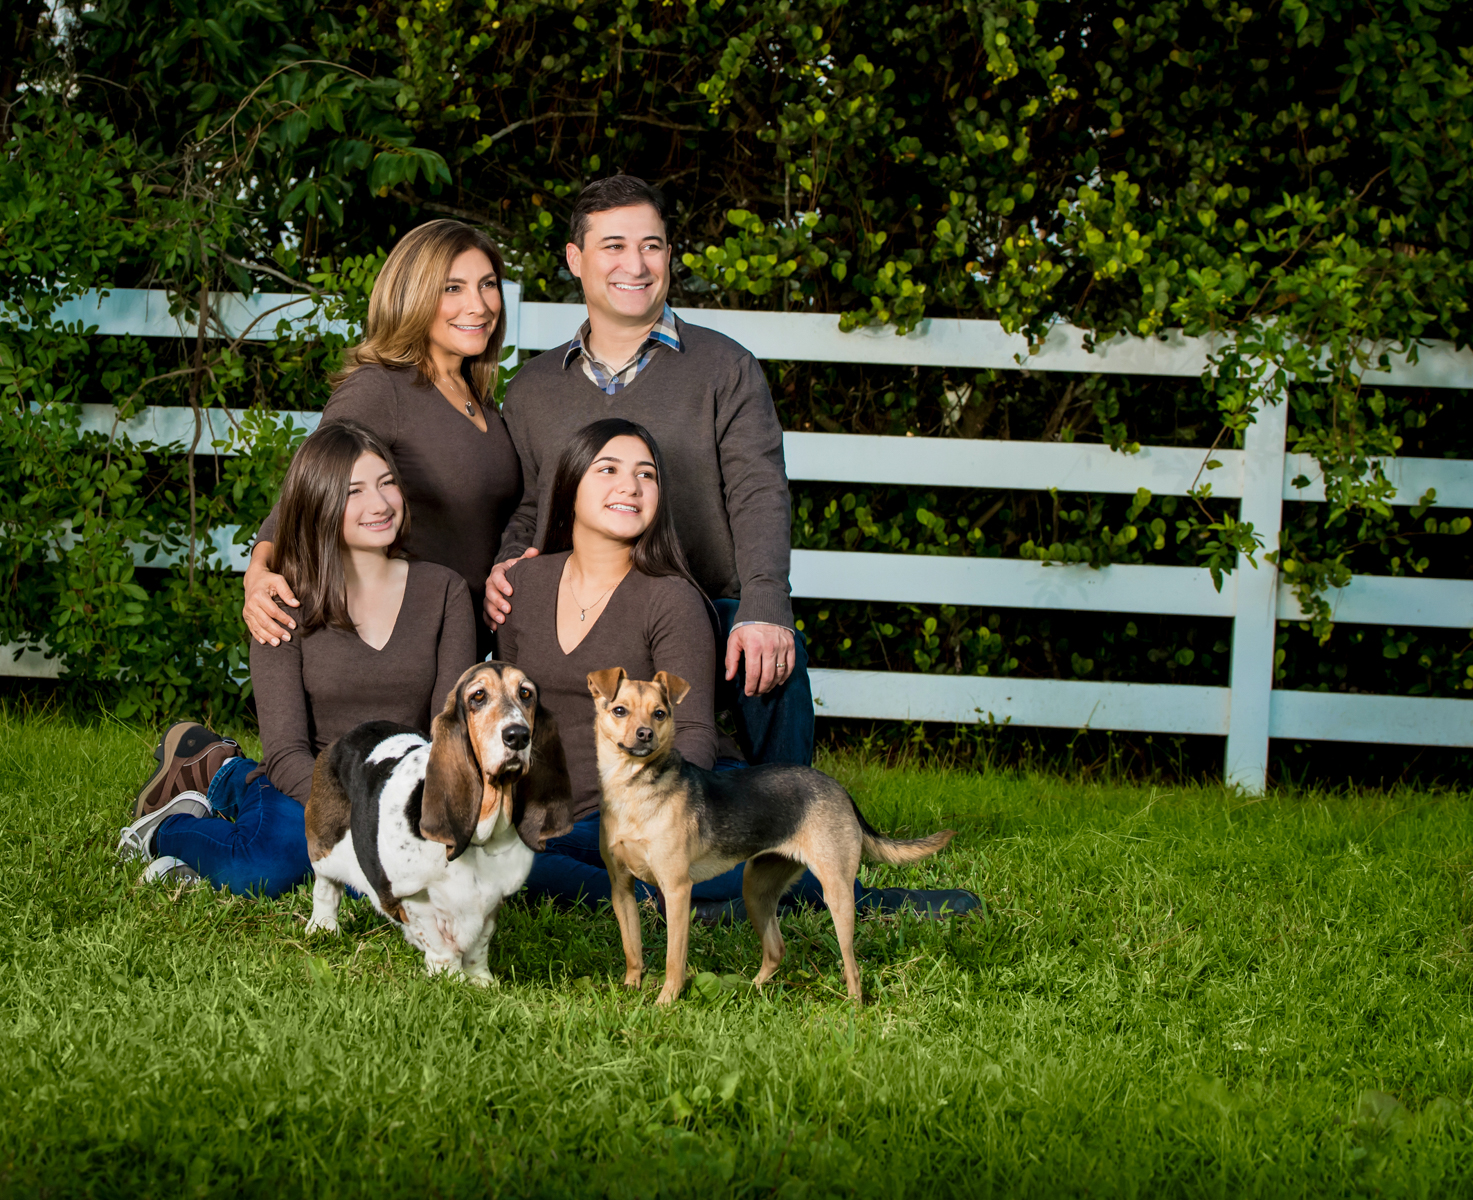 Specializing in family photos on location or in the studio.